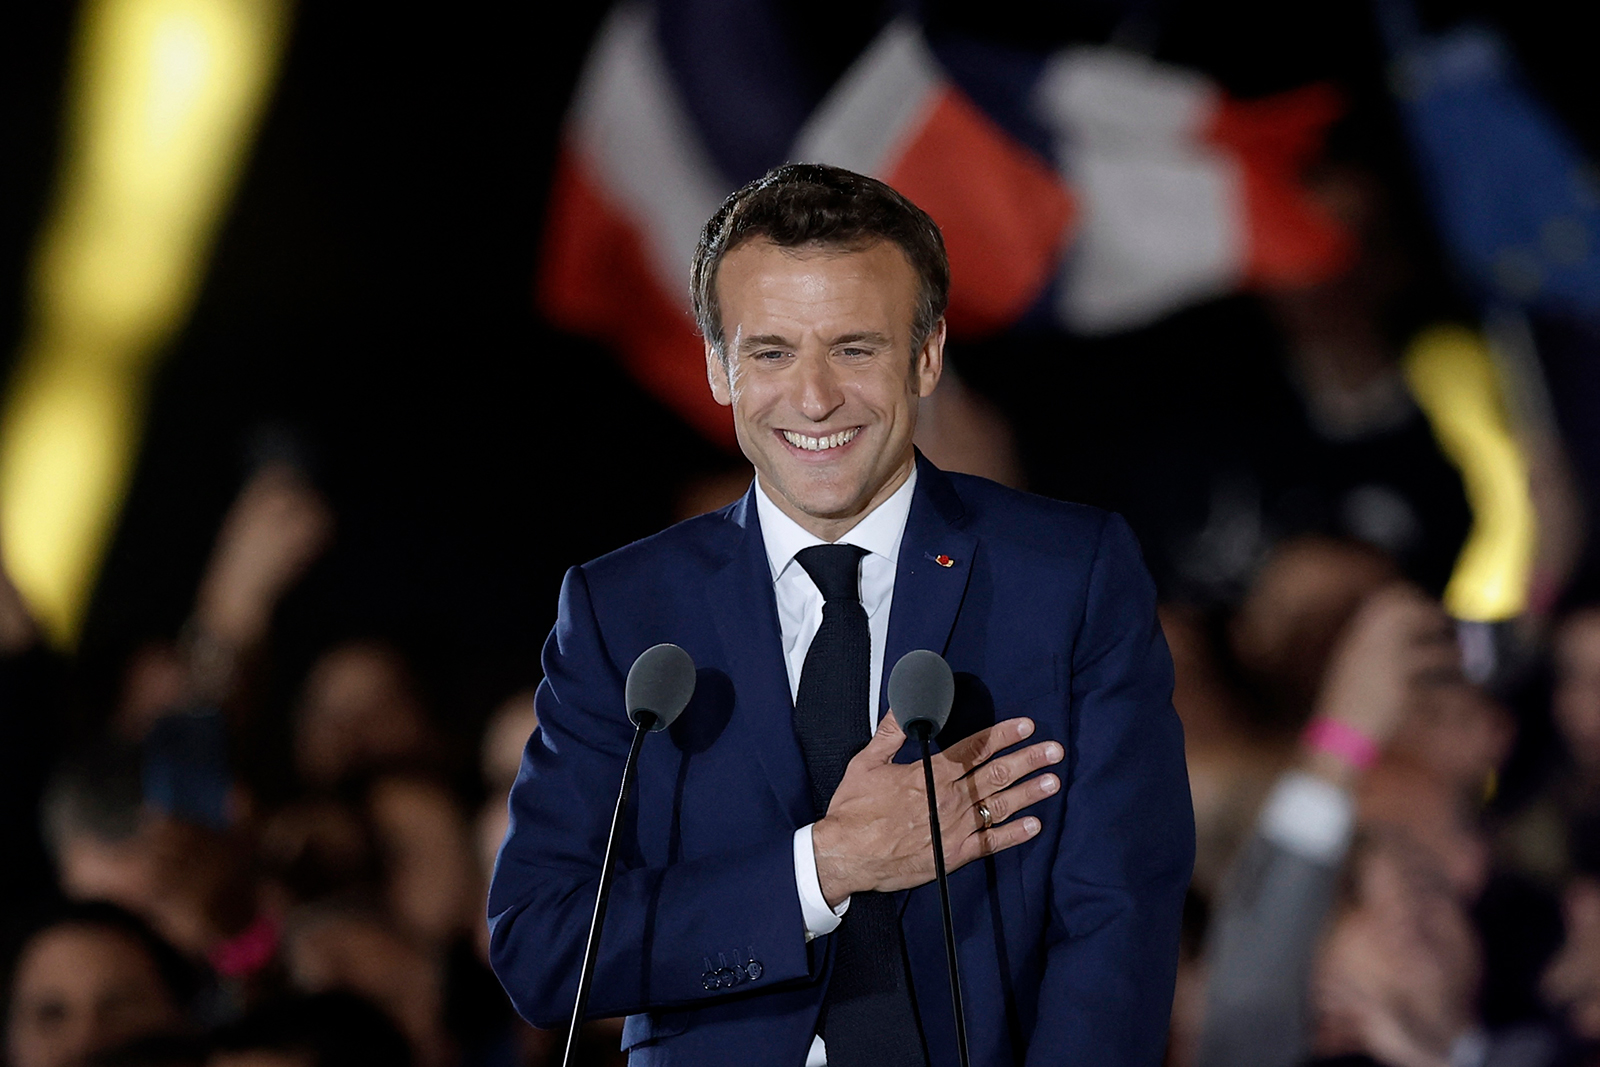 Emmanuel Macron gestures as he arrives to deliver a speech at his victory rally at the Champs de Mars in Paris on April 24.